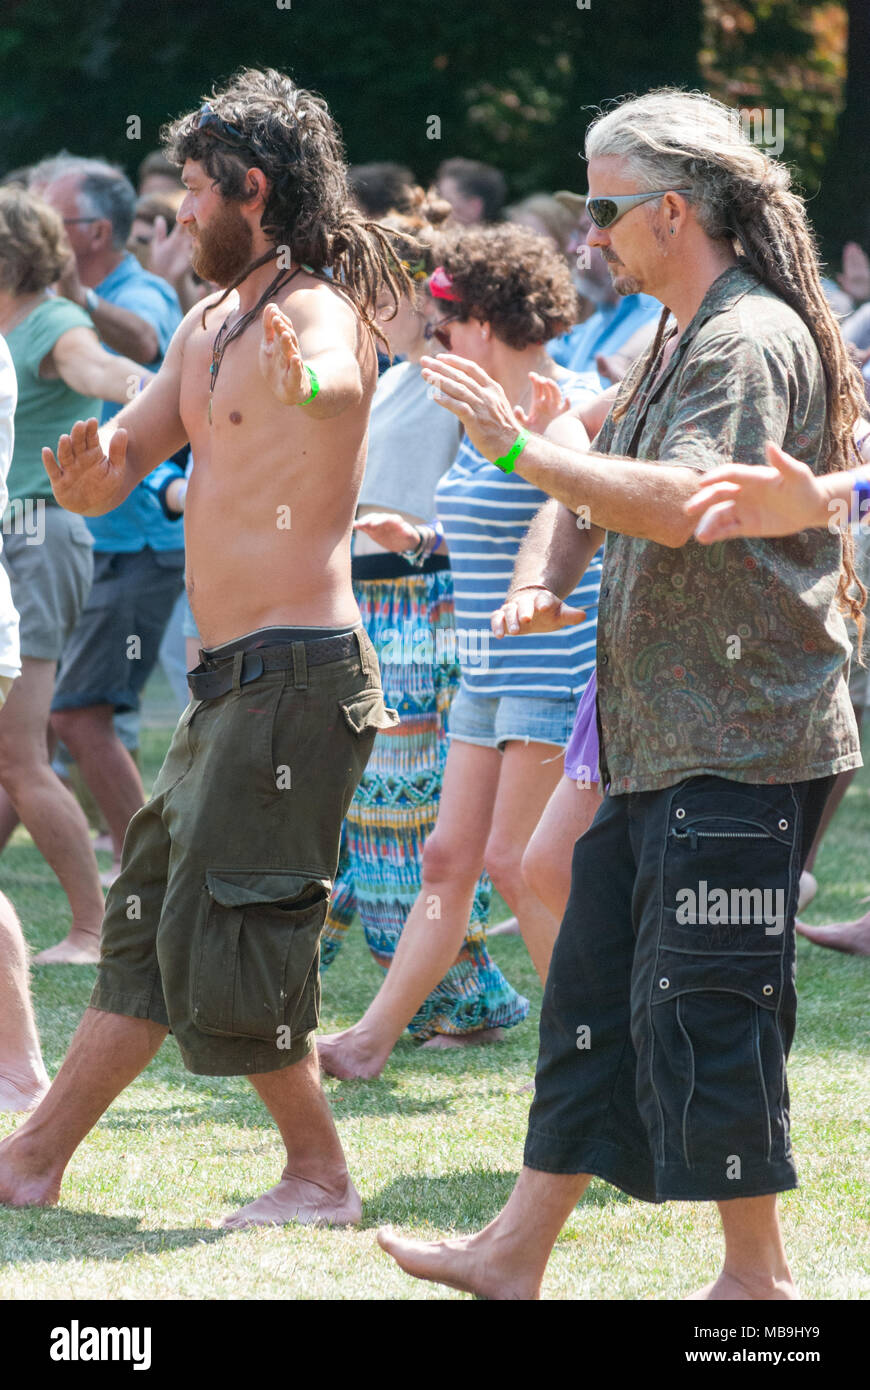 People attending an outdoor yoga class at a music festival. Men with long hair in dreadlocks. Stock Photo